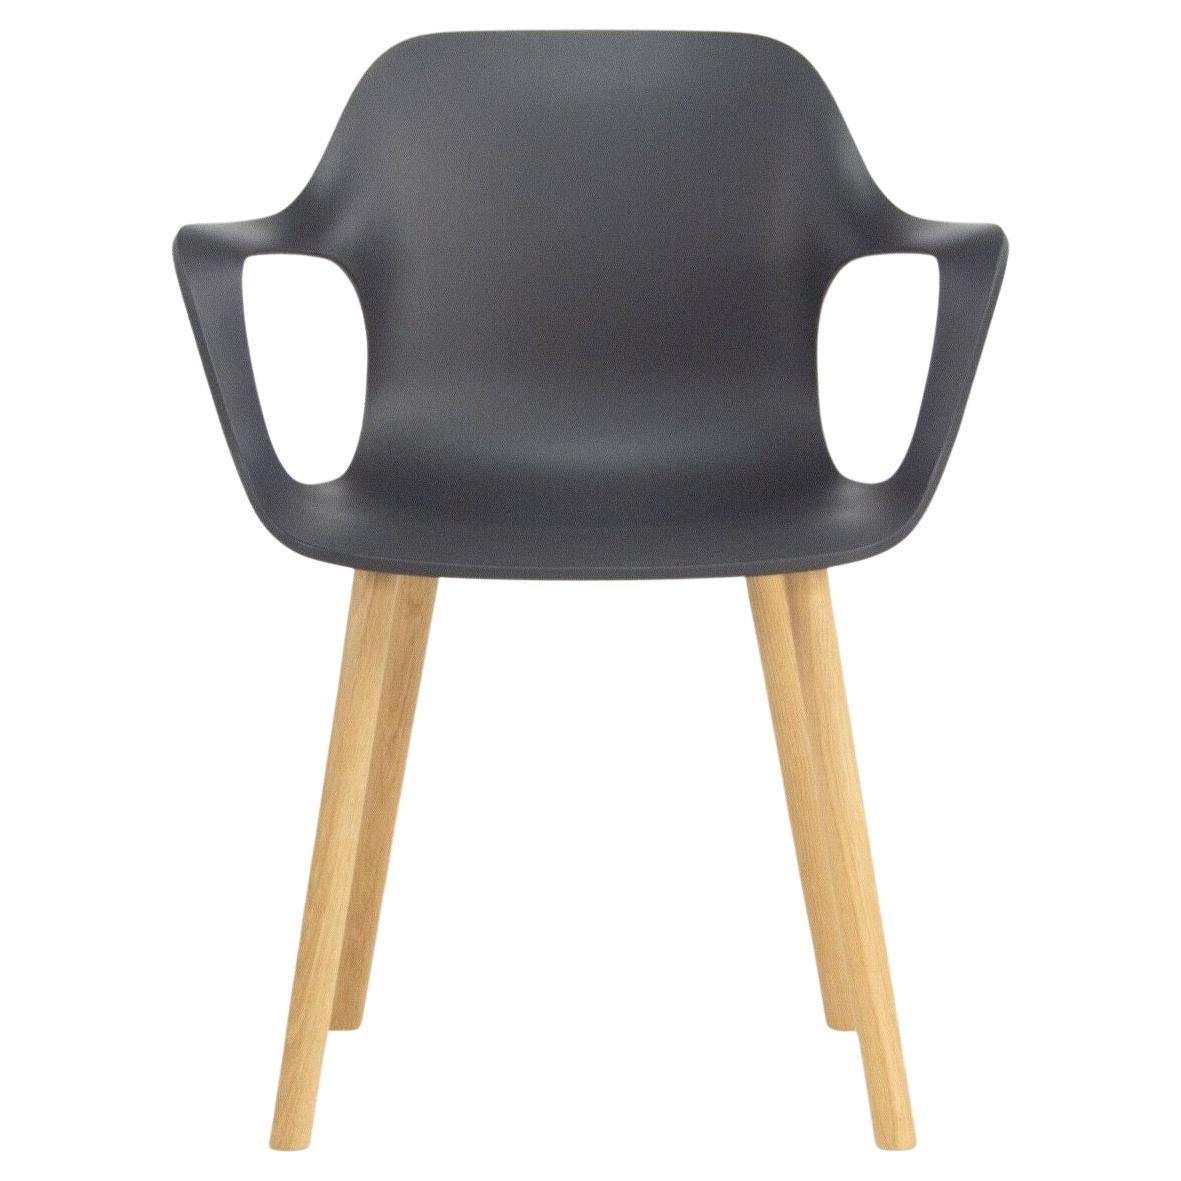 2018 Jasper Morrison for Vitra HAL Armchair with Black Seat and Oak Wood Legs For Sale